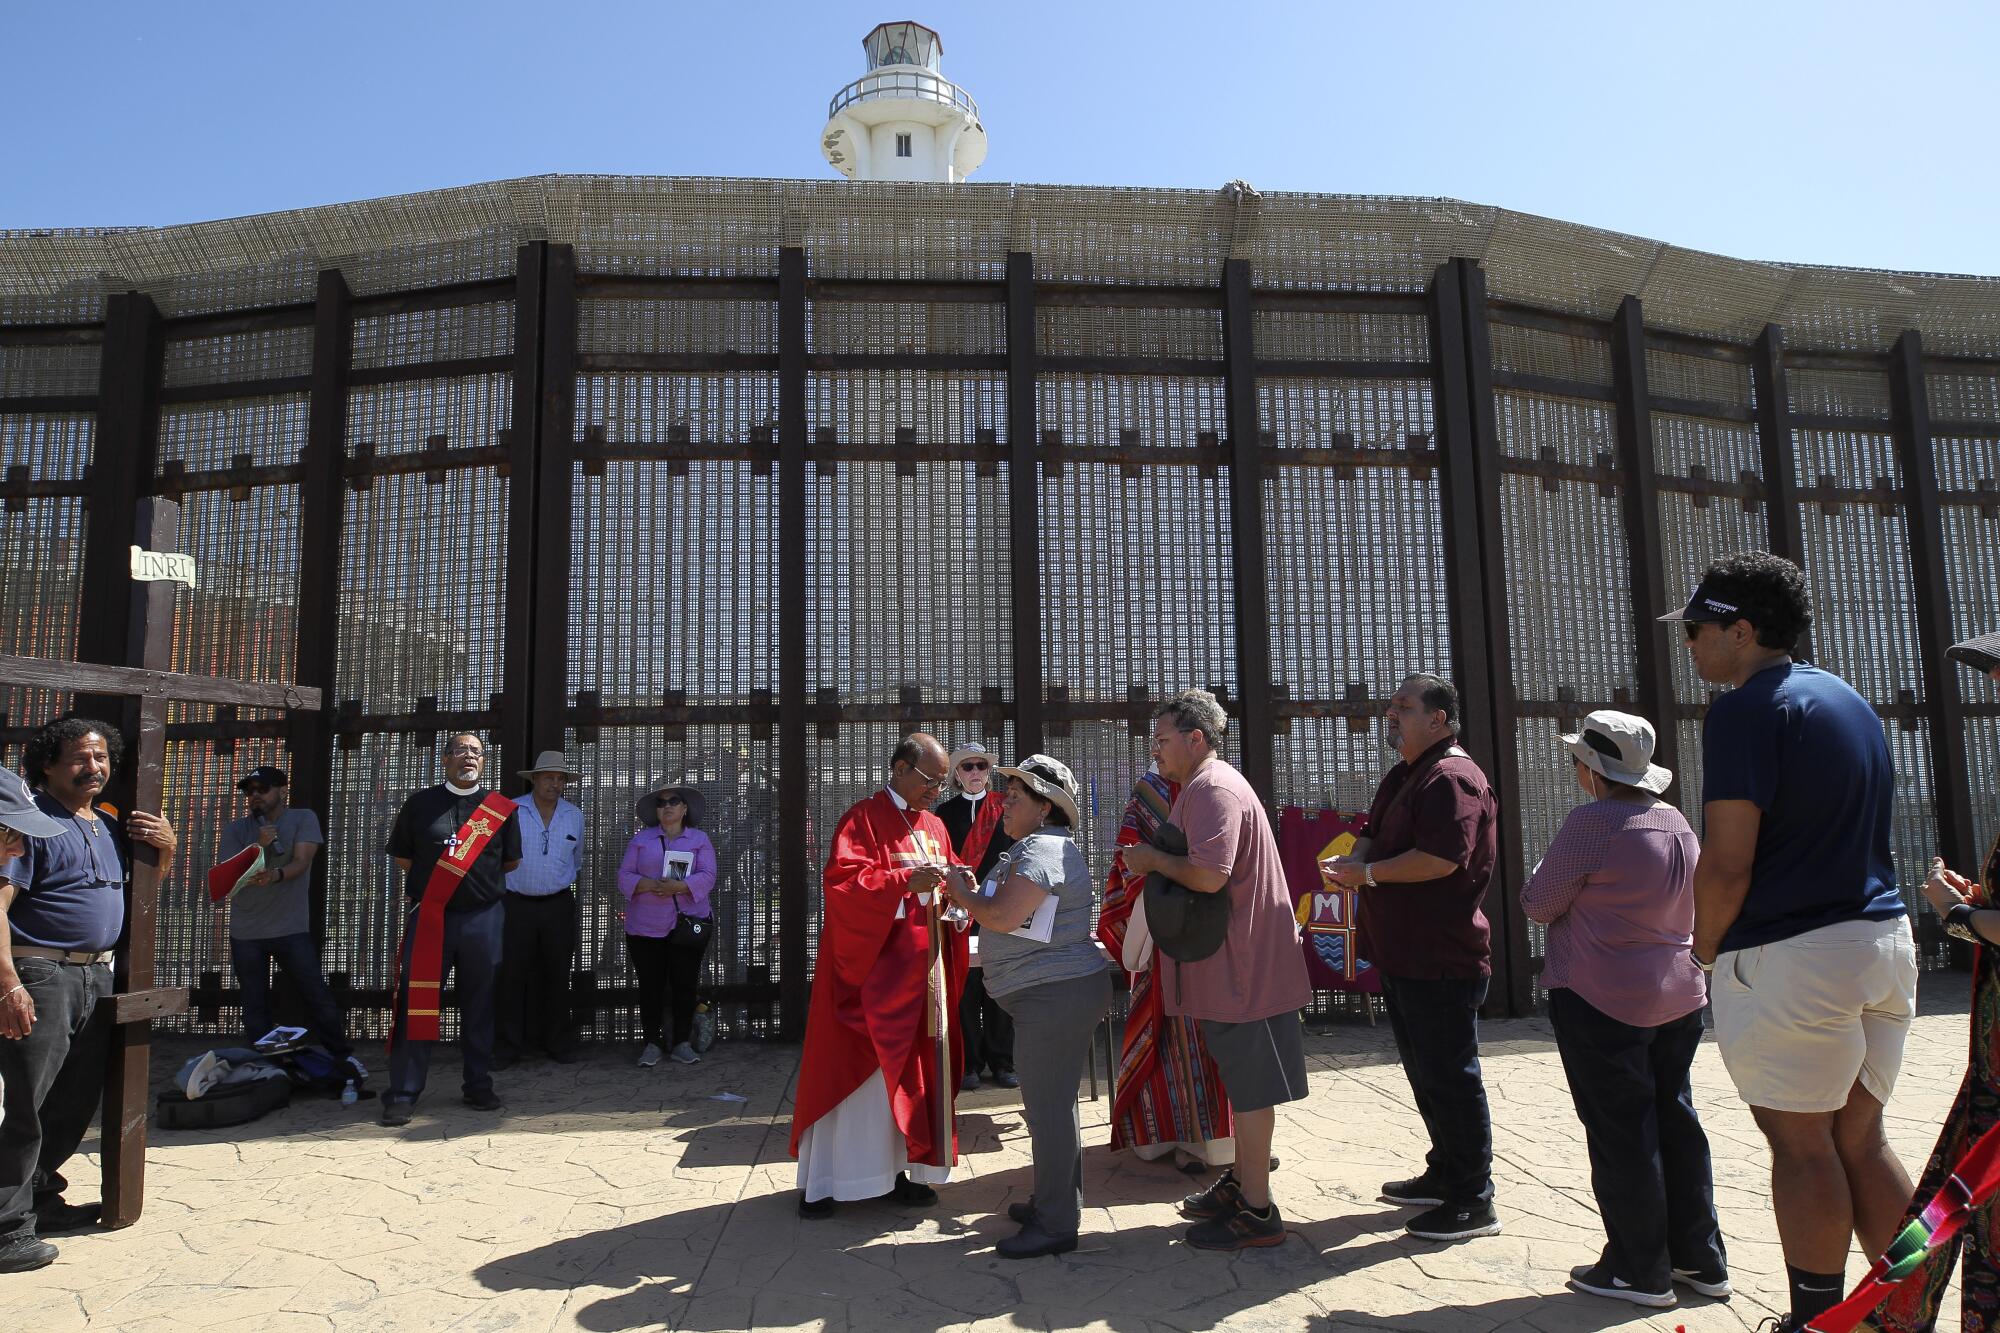 People line up near the border wall to take Communion.